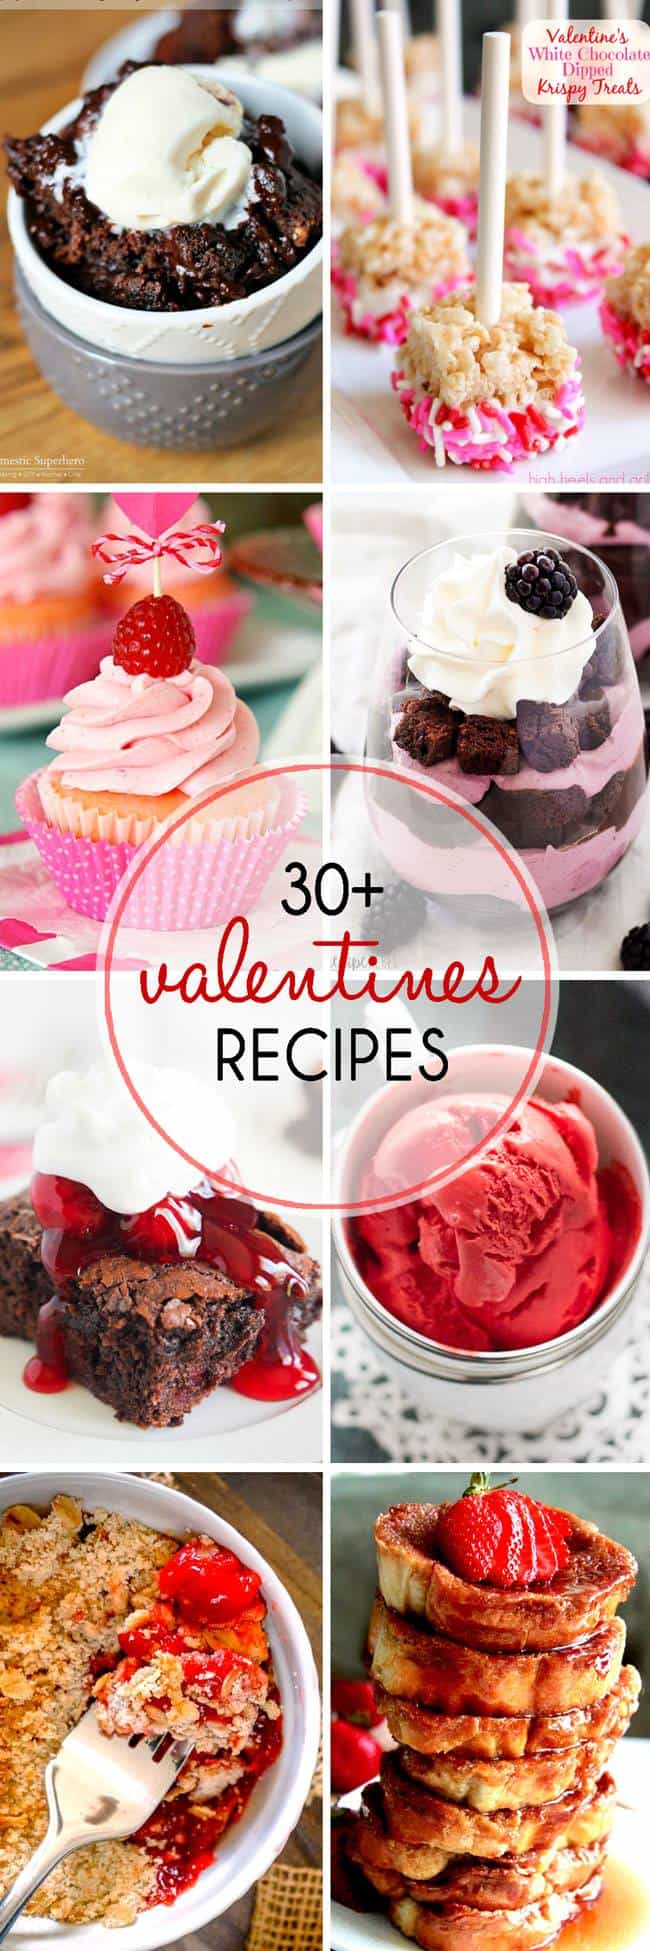 Over 30 Valentine's Day recipes that will make you swoon! lemonsforlulu.com